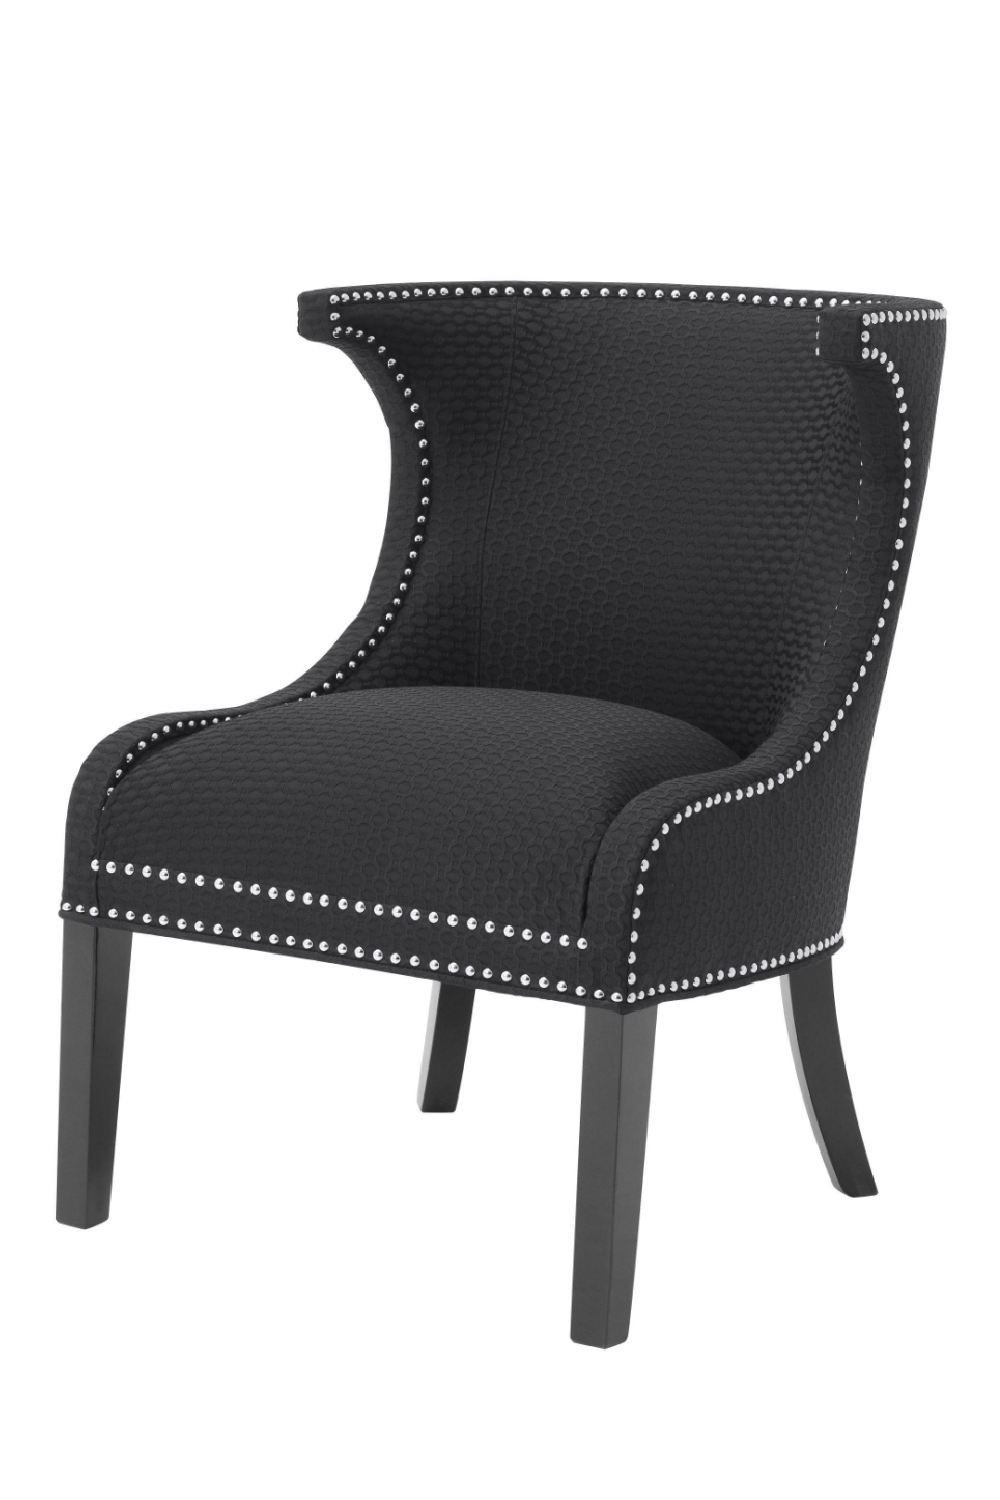 Black Studded Wing Chair | Eichholtz Elson | Oroa.com